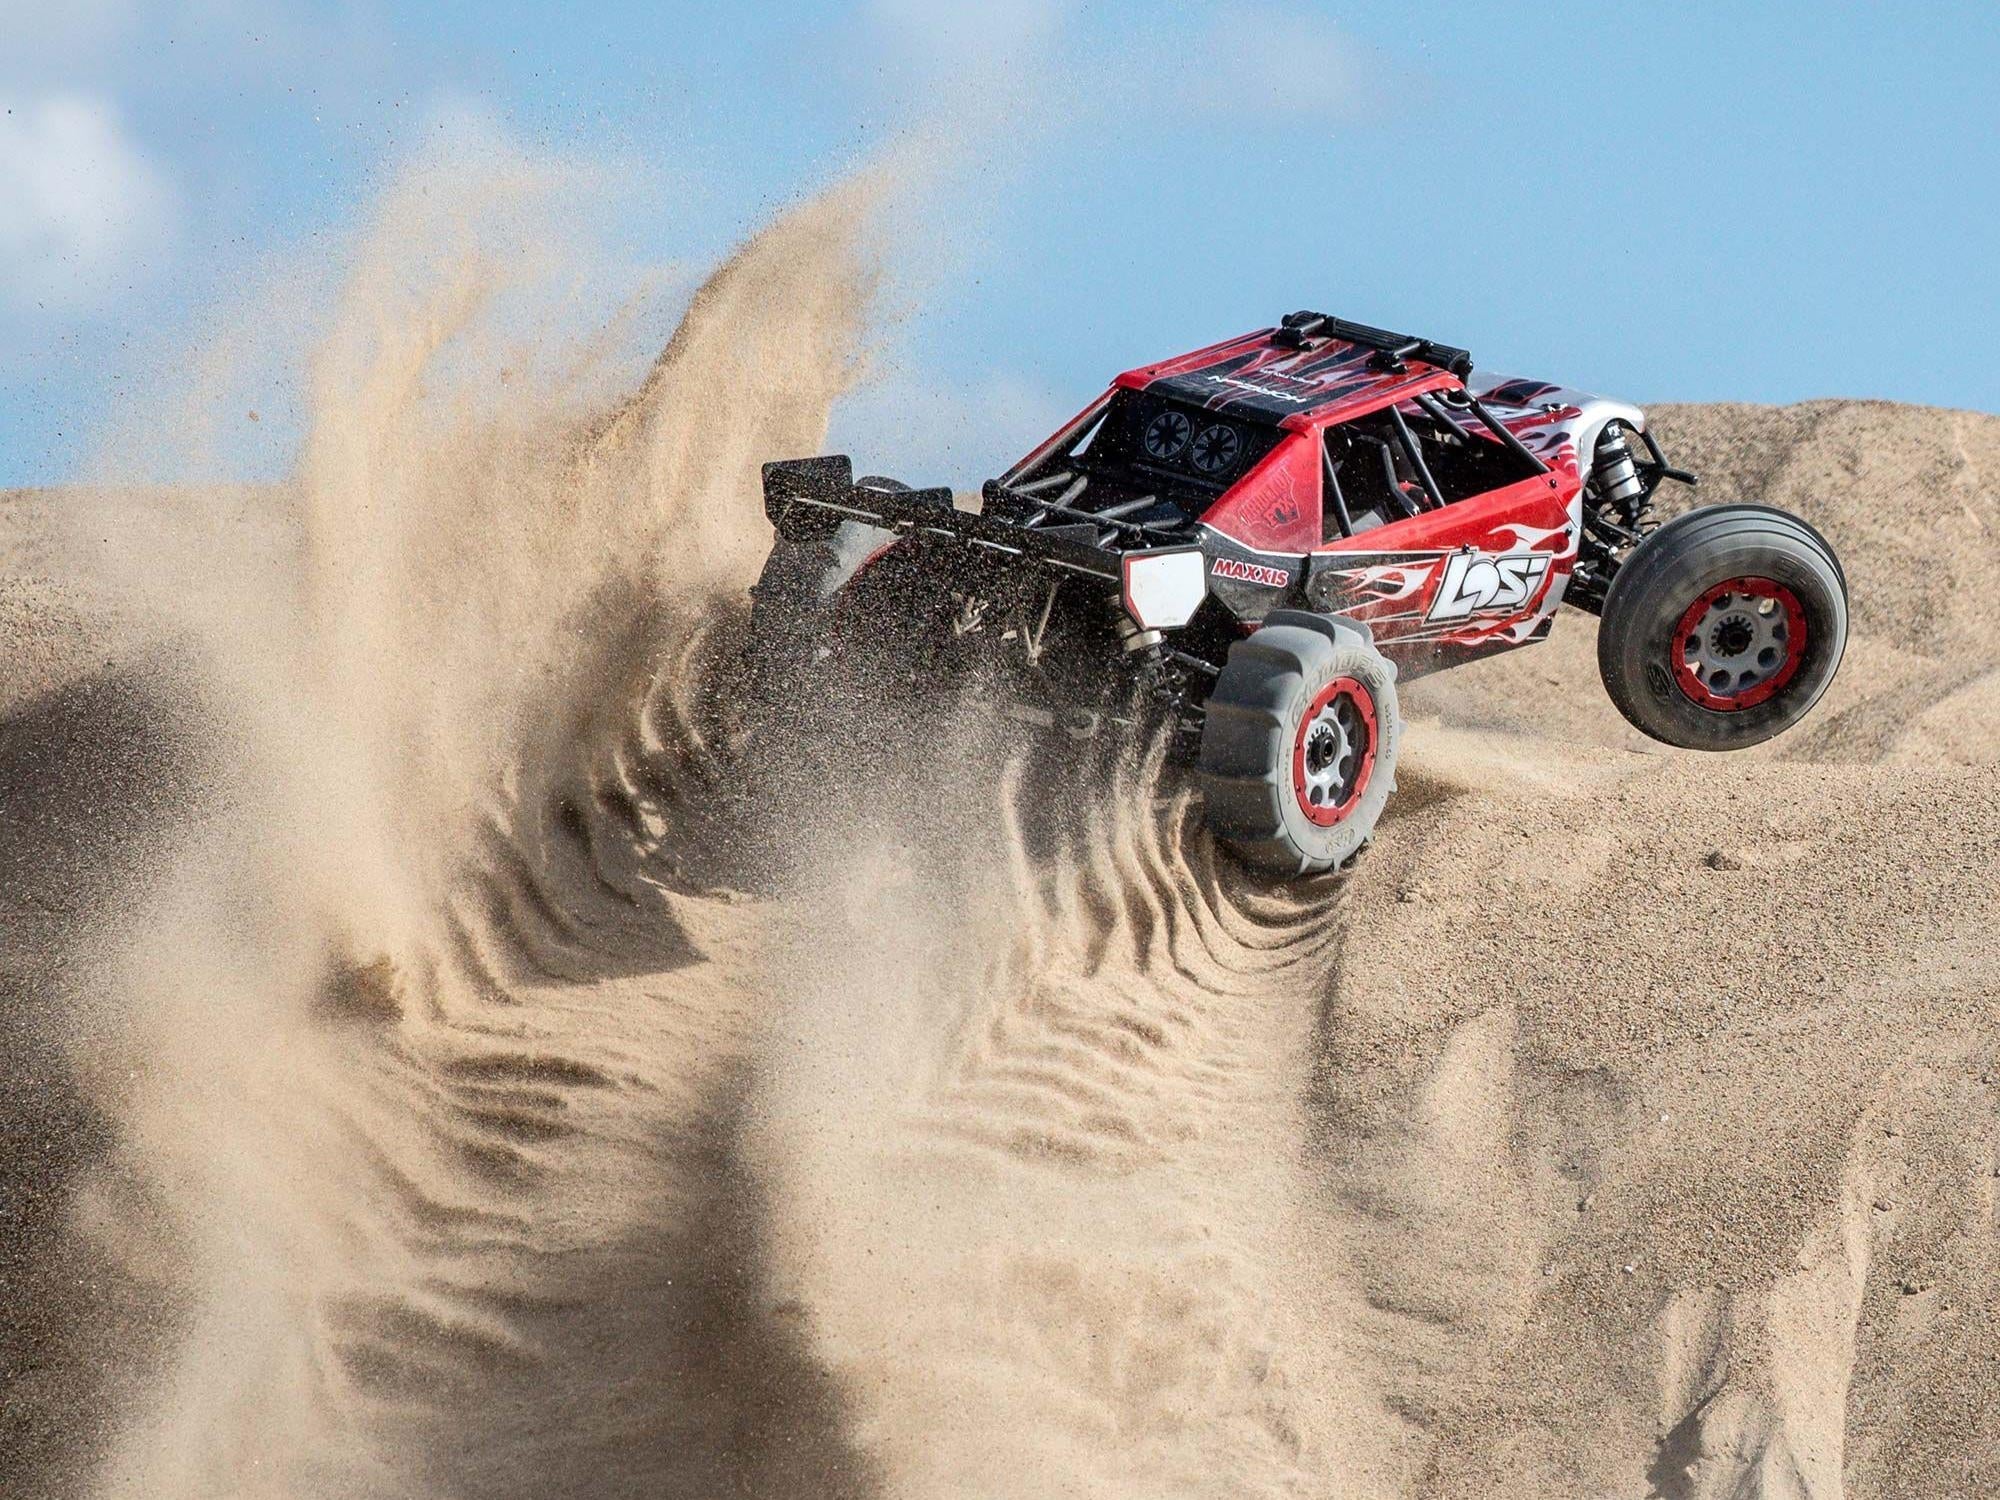 Losi 1/5 DBXL-E 2.0 4WD Desert Buggy Brushless RTR with Smart - Losi Scheme  LOS05020V2T2